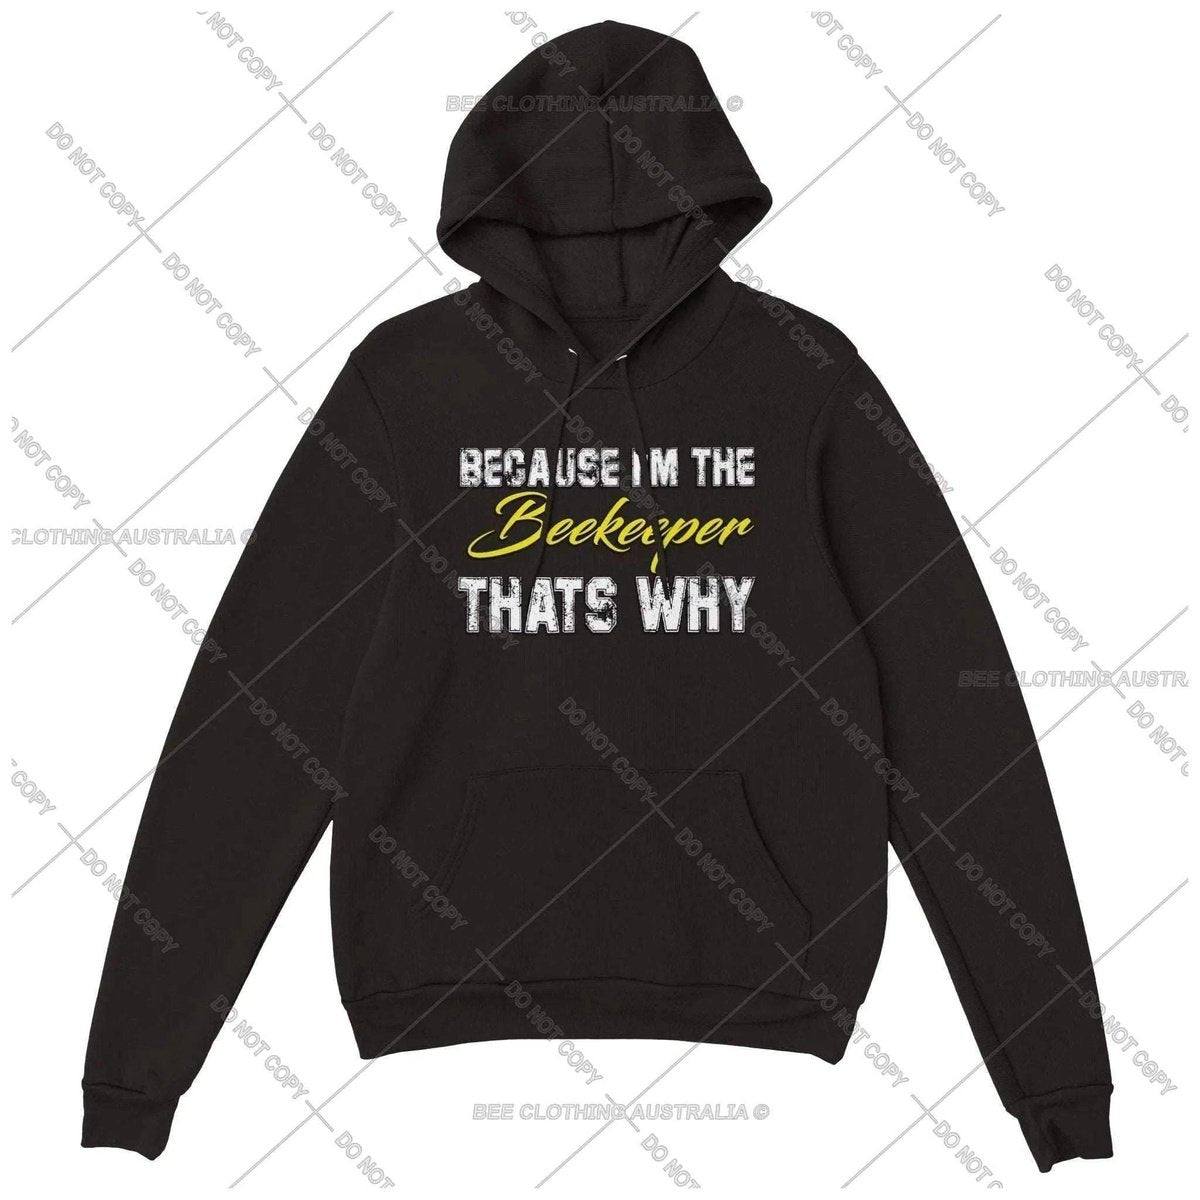 Because I'm the beekeeper that's why Hoodie - Premium Unisex Pullover Hoodie Adults Pullover Hoodie Black / XS BC Australia